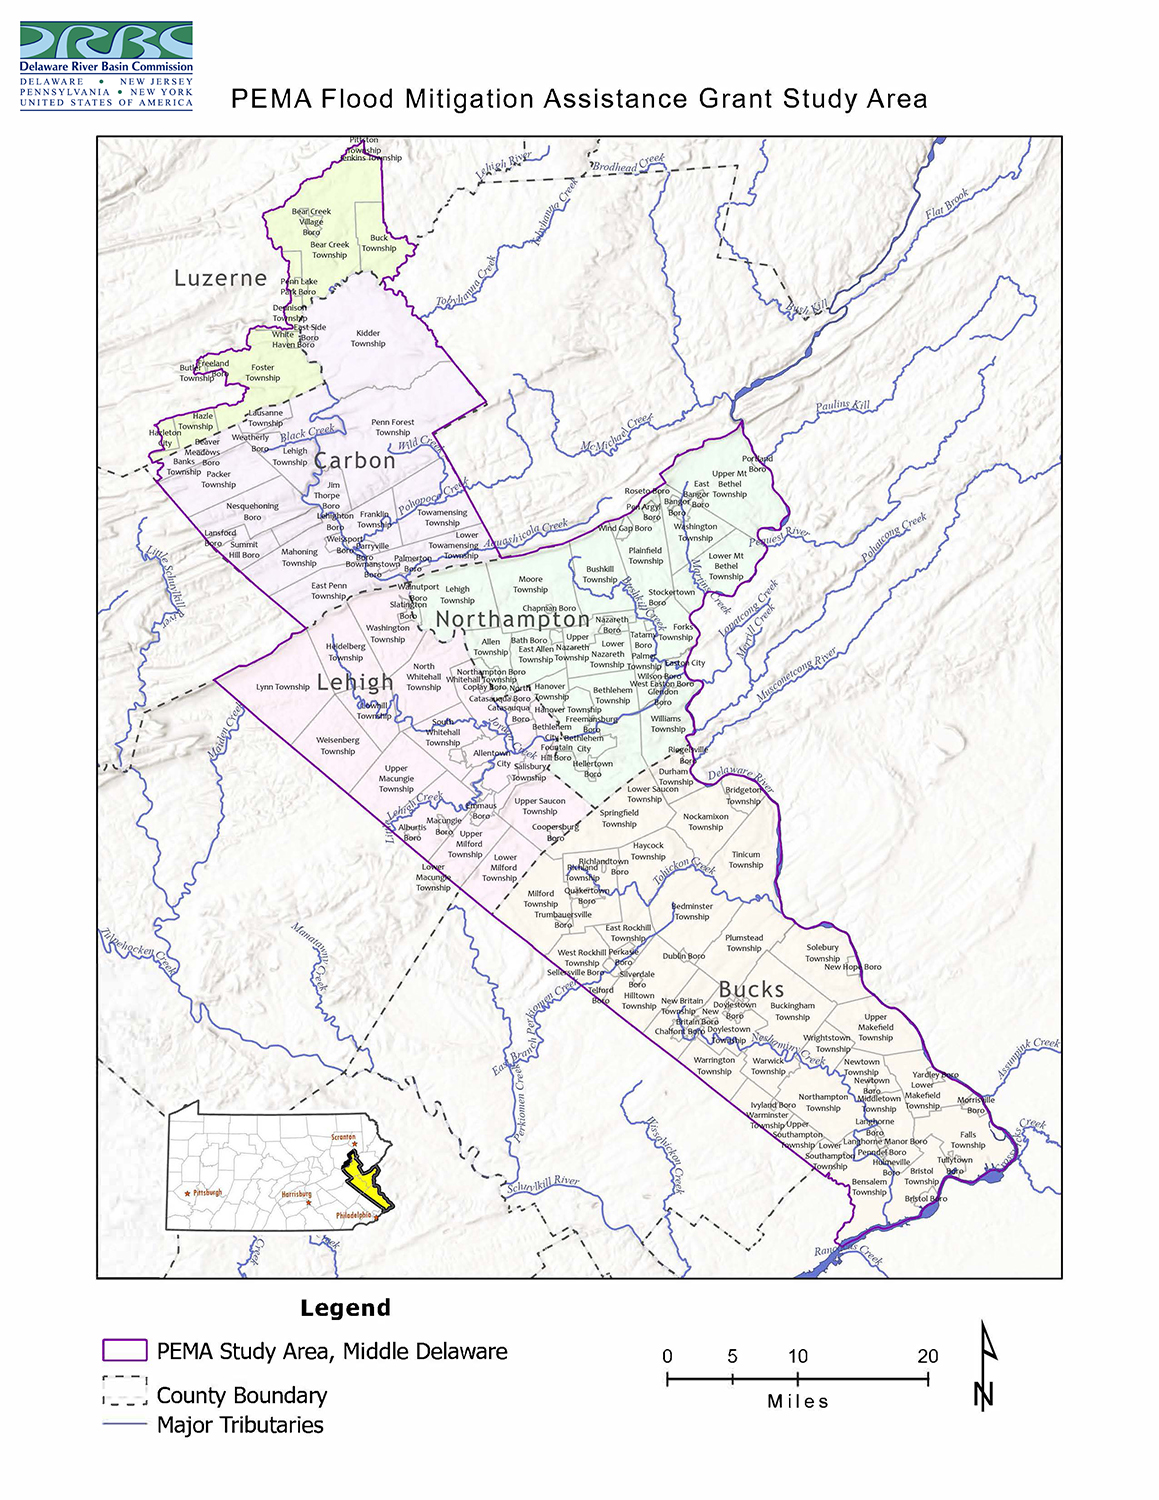 Map of the PEMA Middle Delaware Study Area. Map by the DRBC.